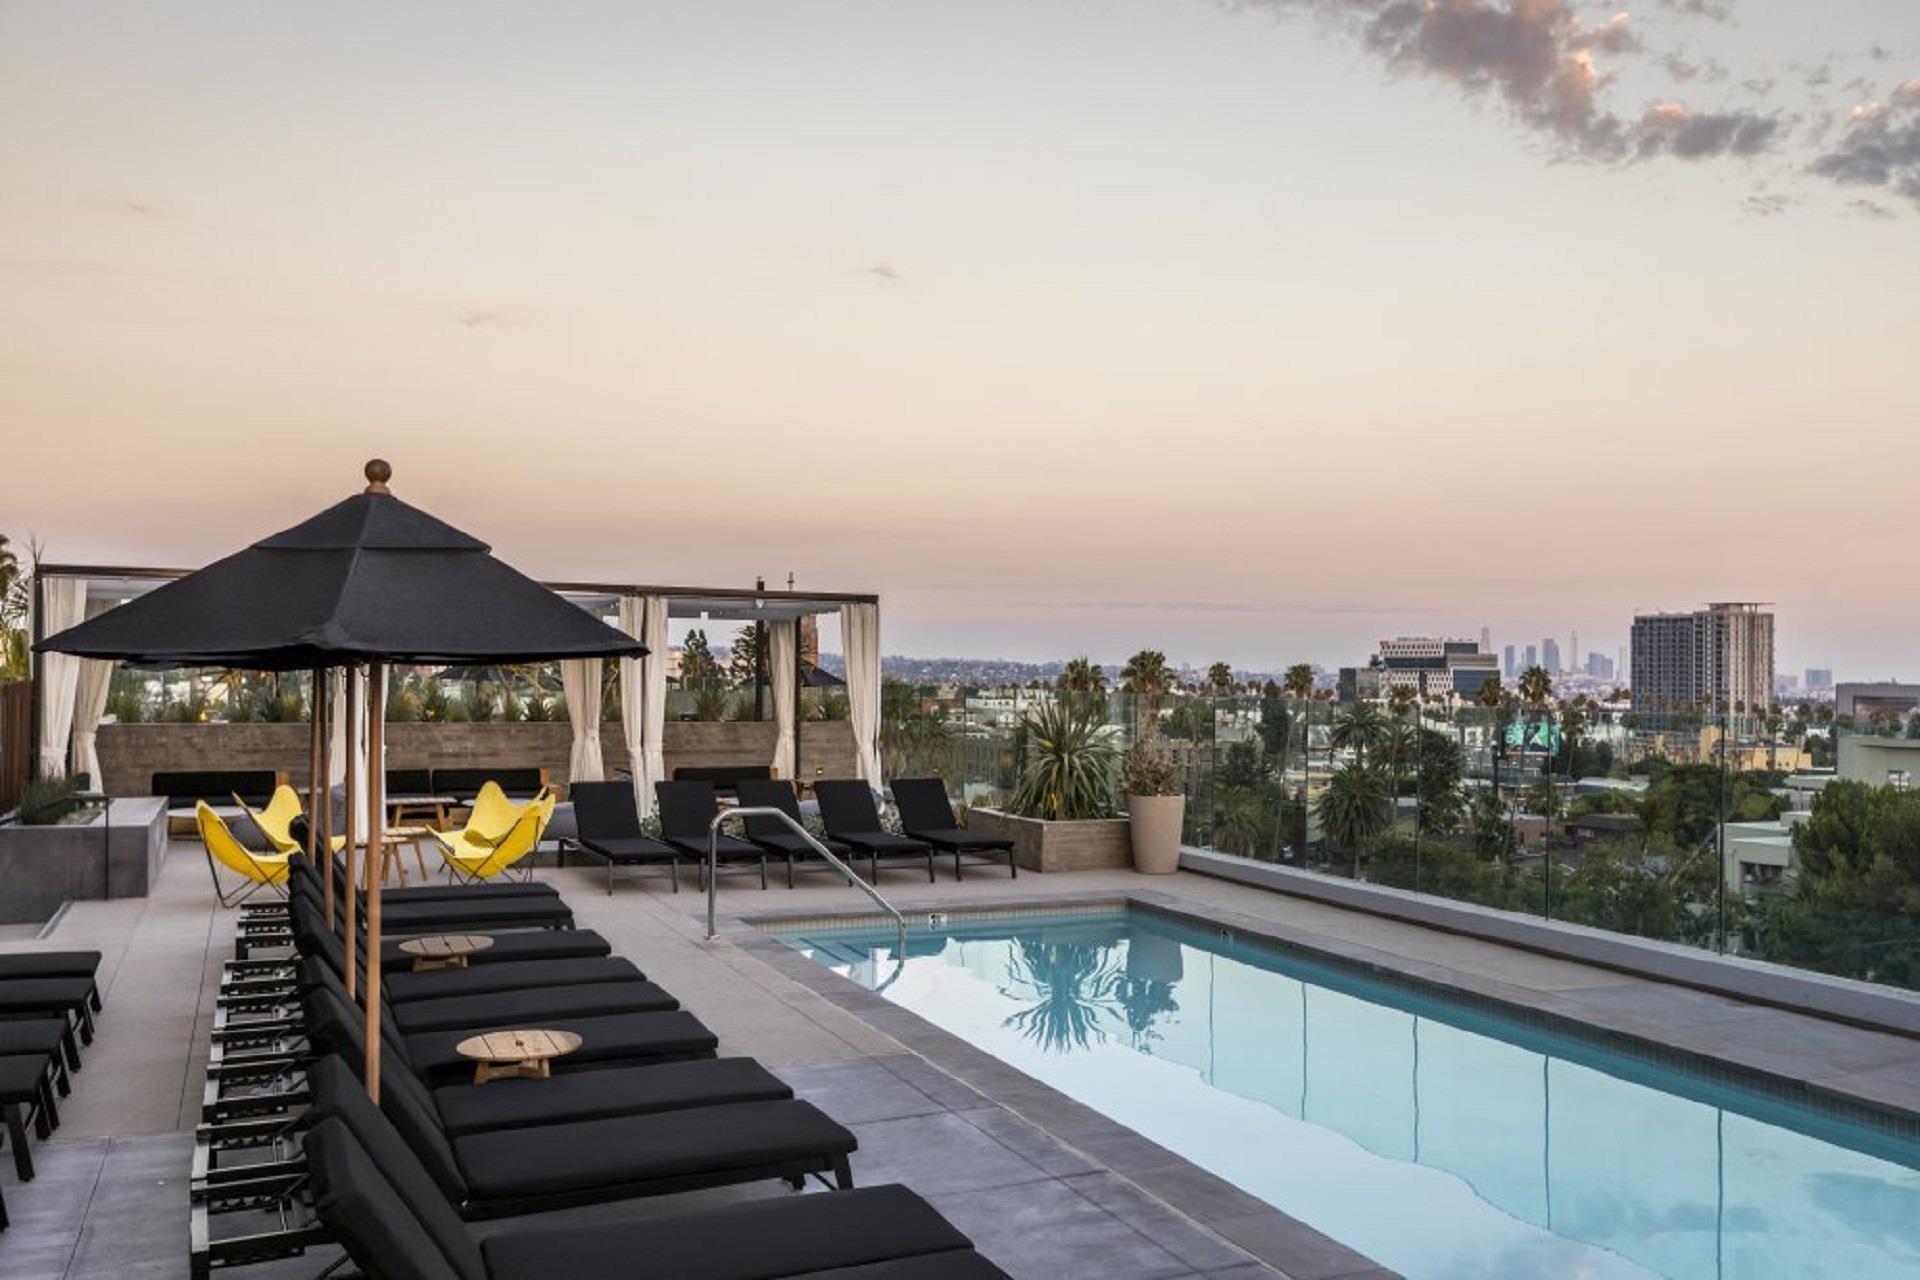 Kimpton Everly Hotel Hollywood in Los Angeles, CA